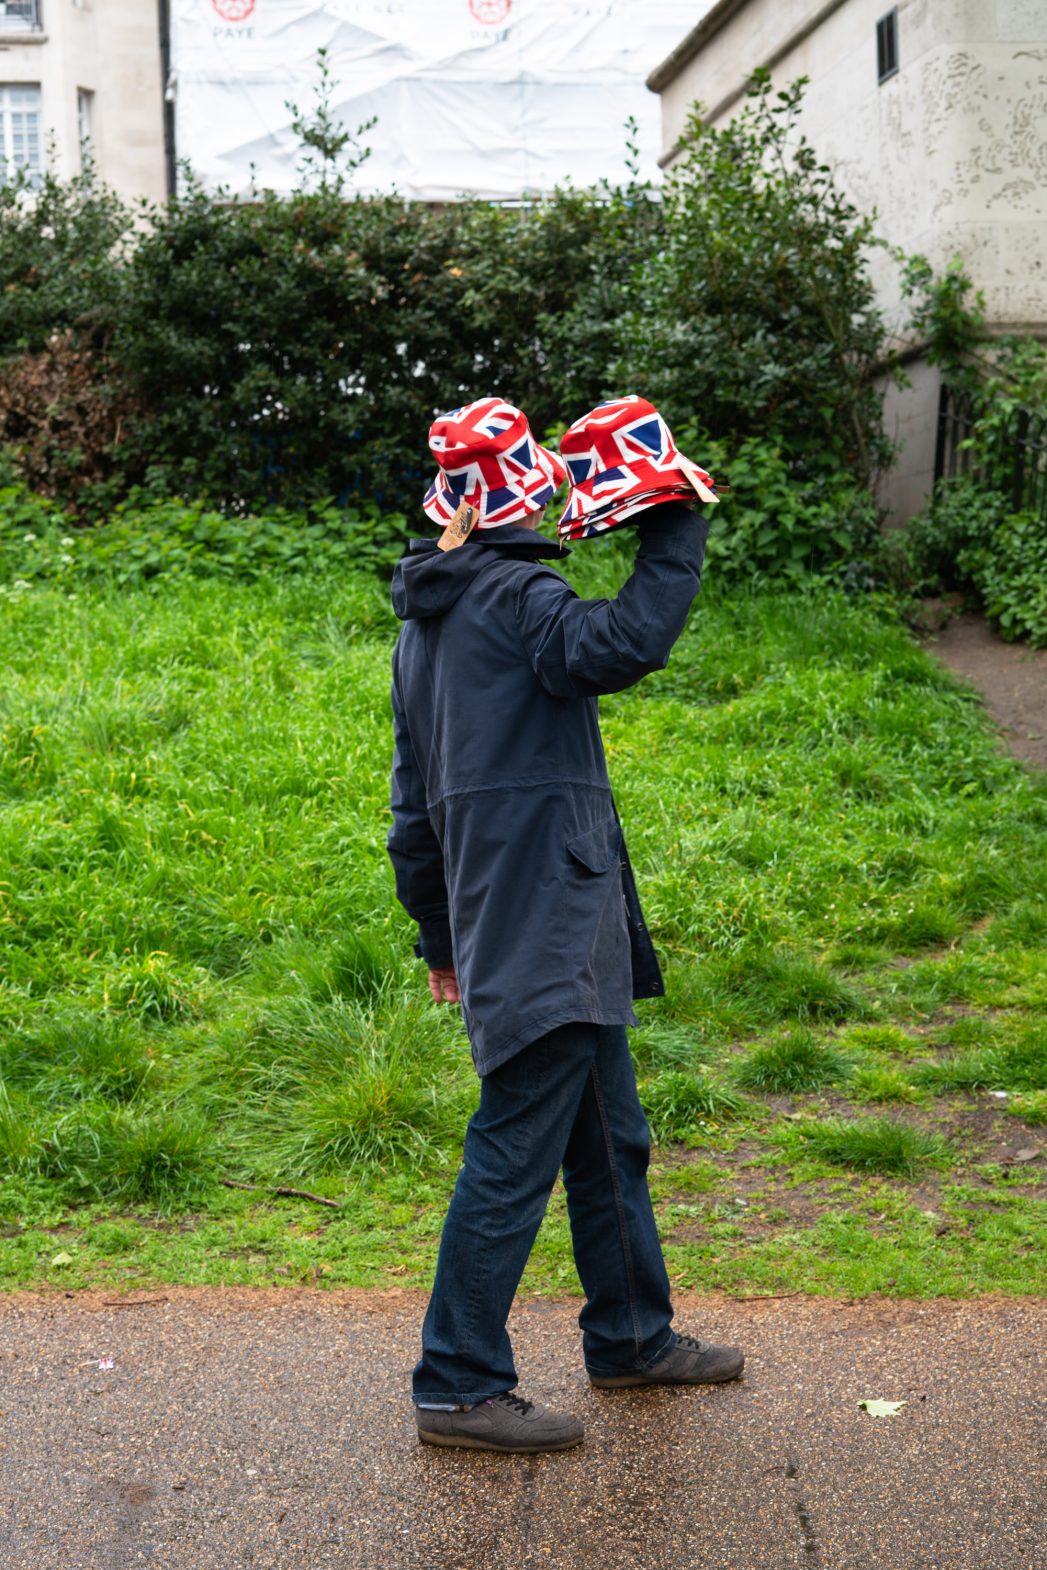 A man in a dark jacket and trousers walking, wearing a Union Jack hat and holding up others to sell.